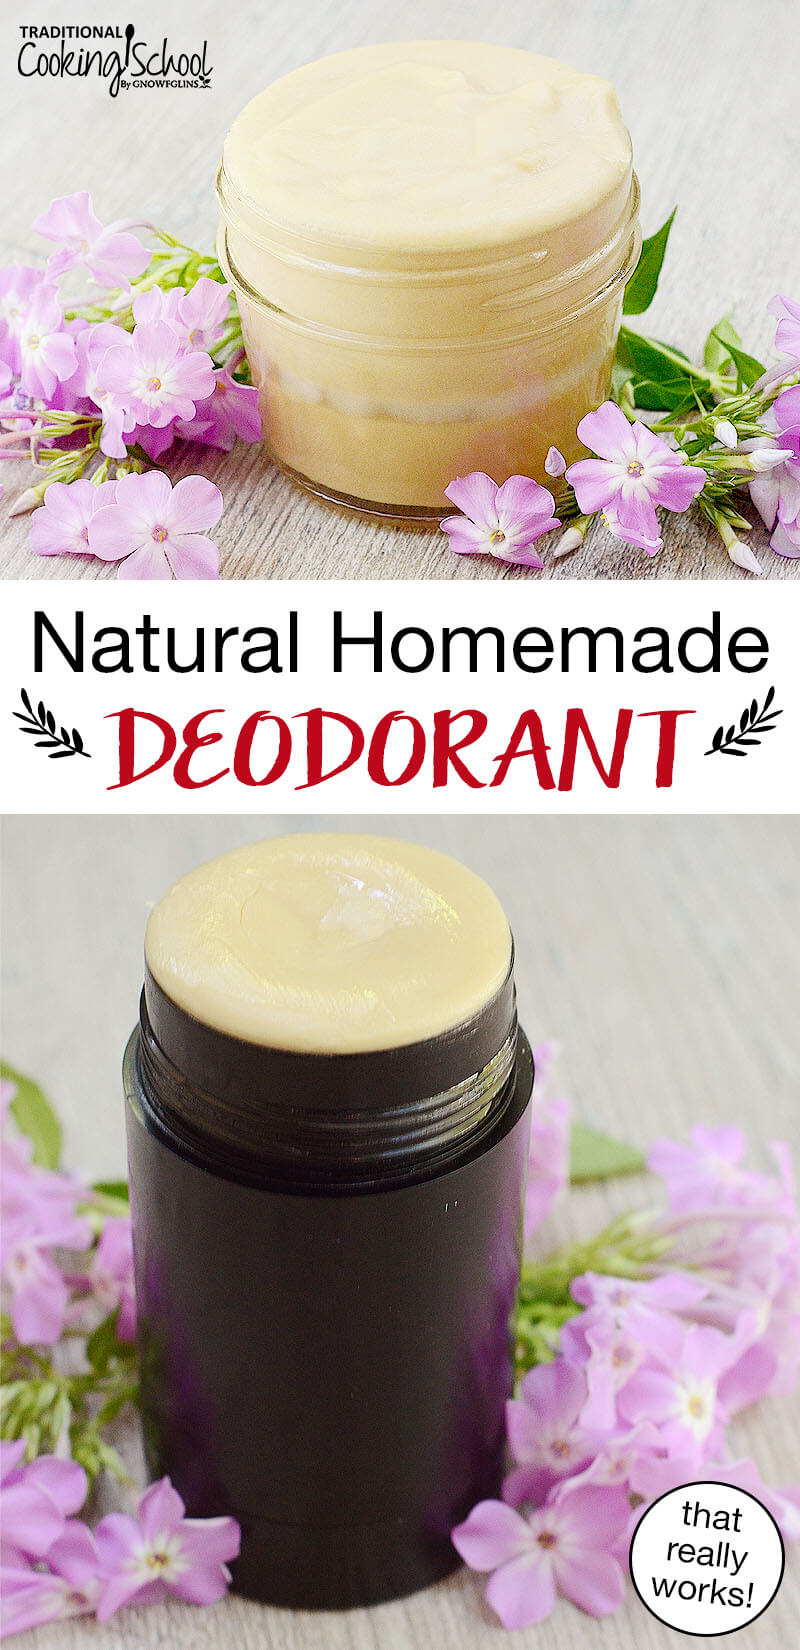 Photo collage of a deodorant stick and homemade deodorant in a small glass jar. Text overlay says: "Natural Homemade Deodorant (that really works!)"